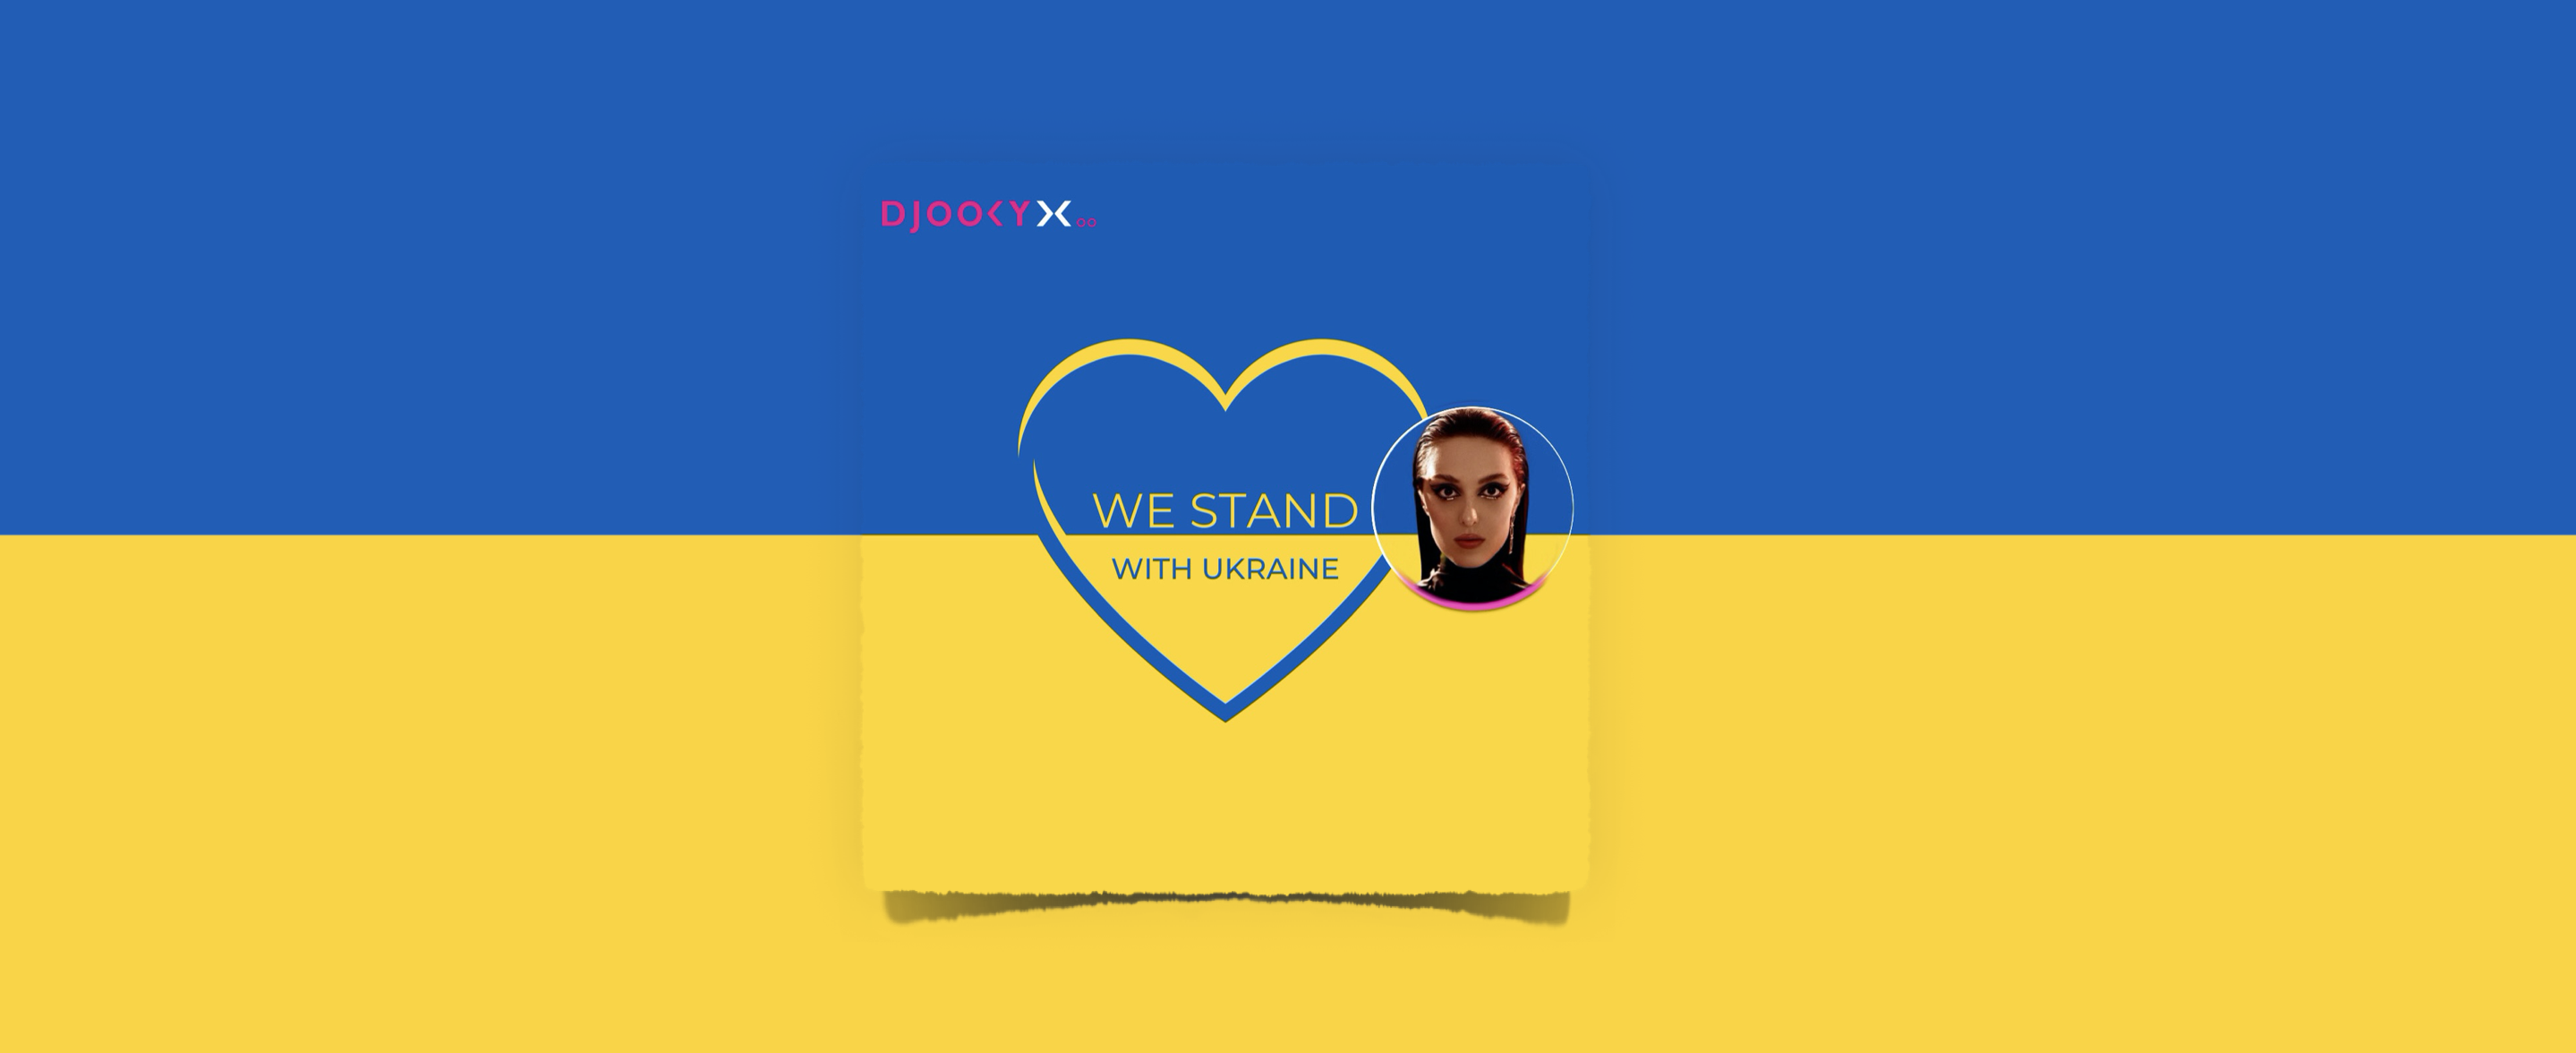 We Stand With Ukraine: KLER's auction for "Sacrifice" is LIVE!